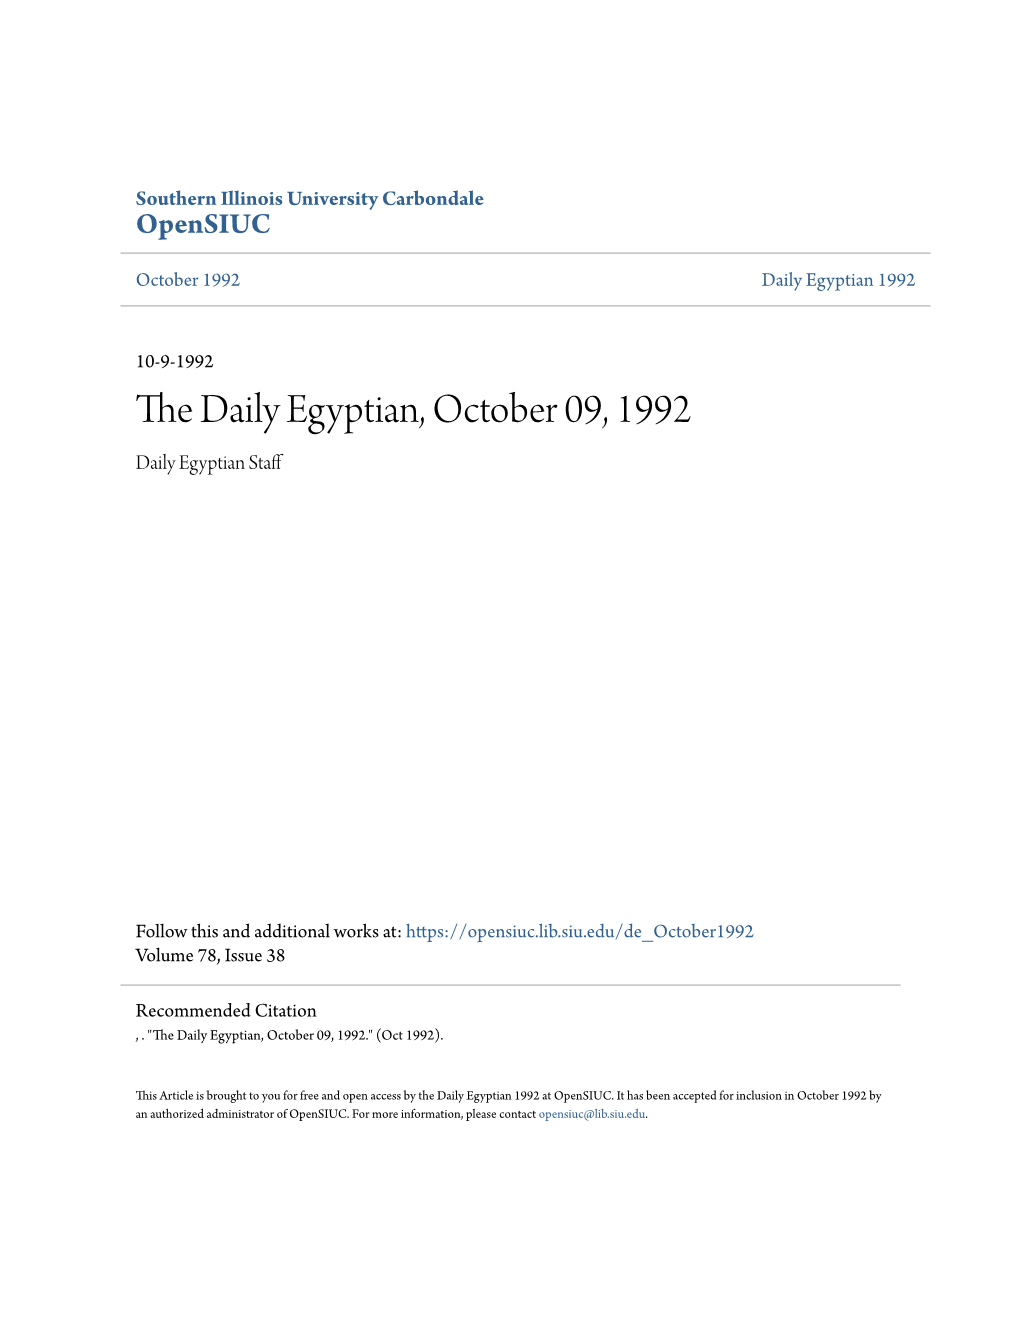 The Daily Egyptian, October 09, 1992